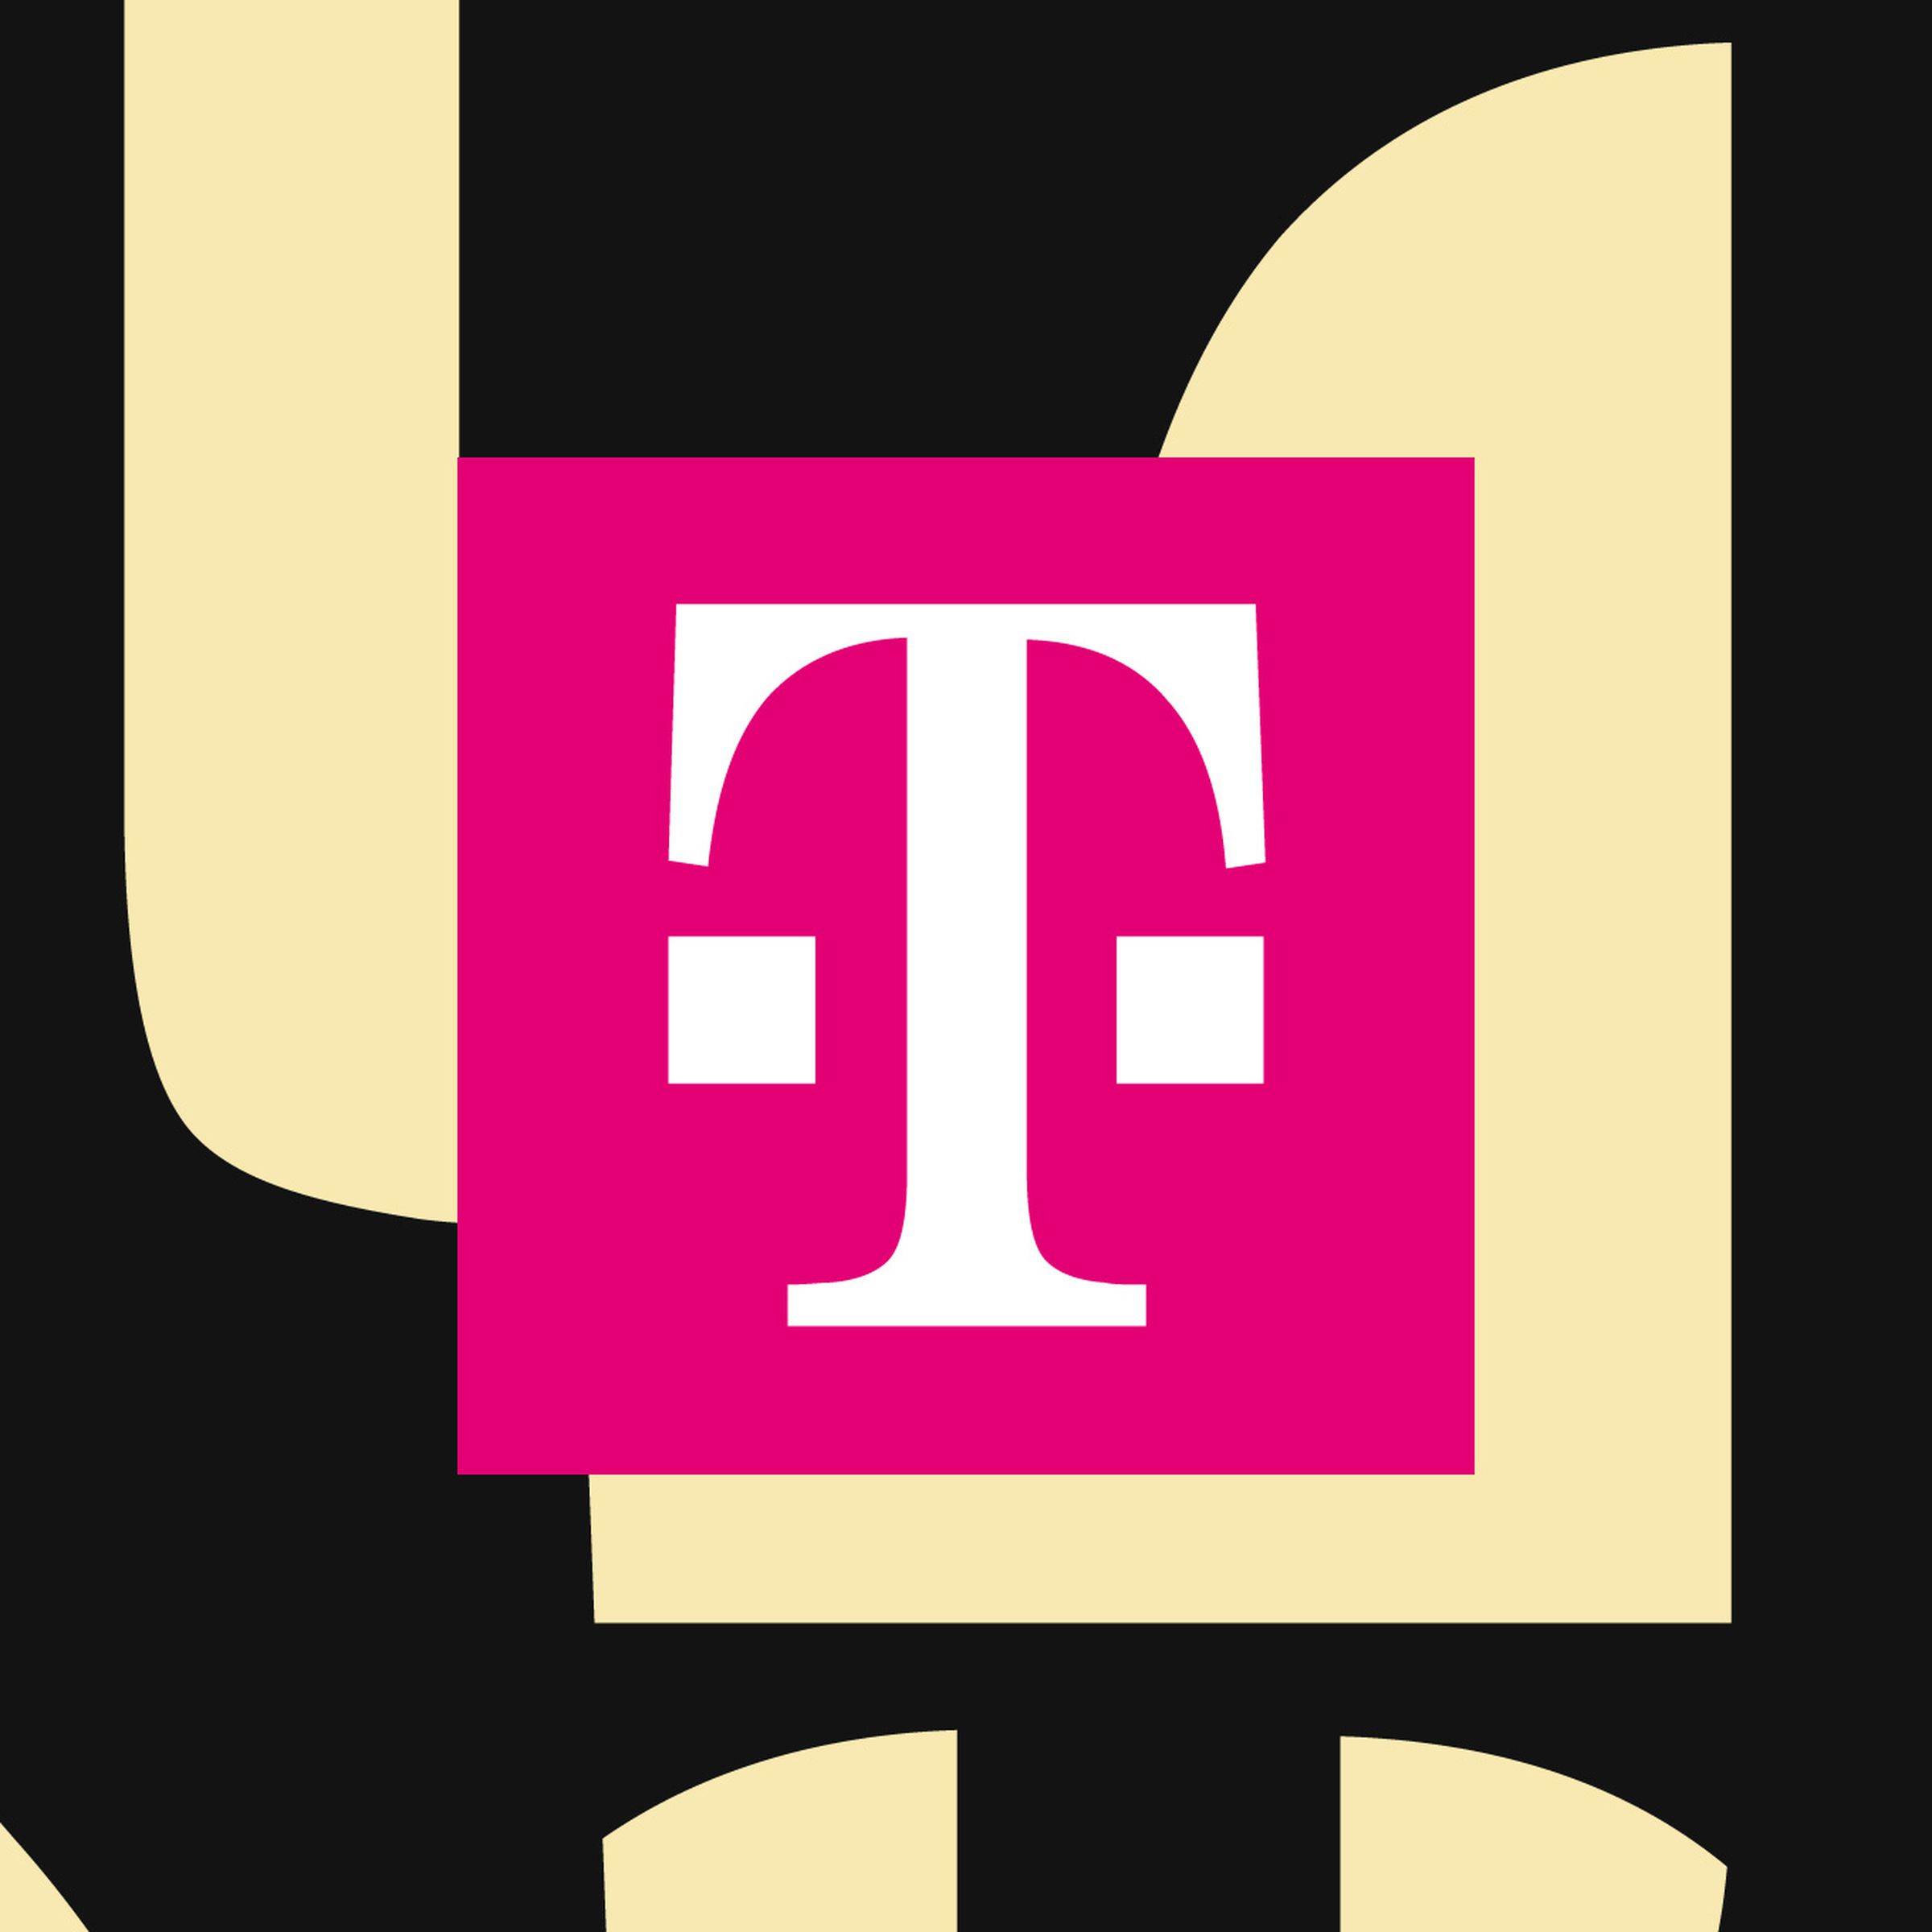 Illustration of the T-Mobile logo on a tan and black background.